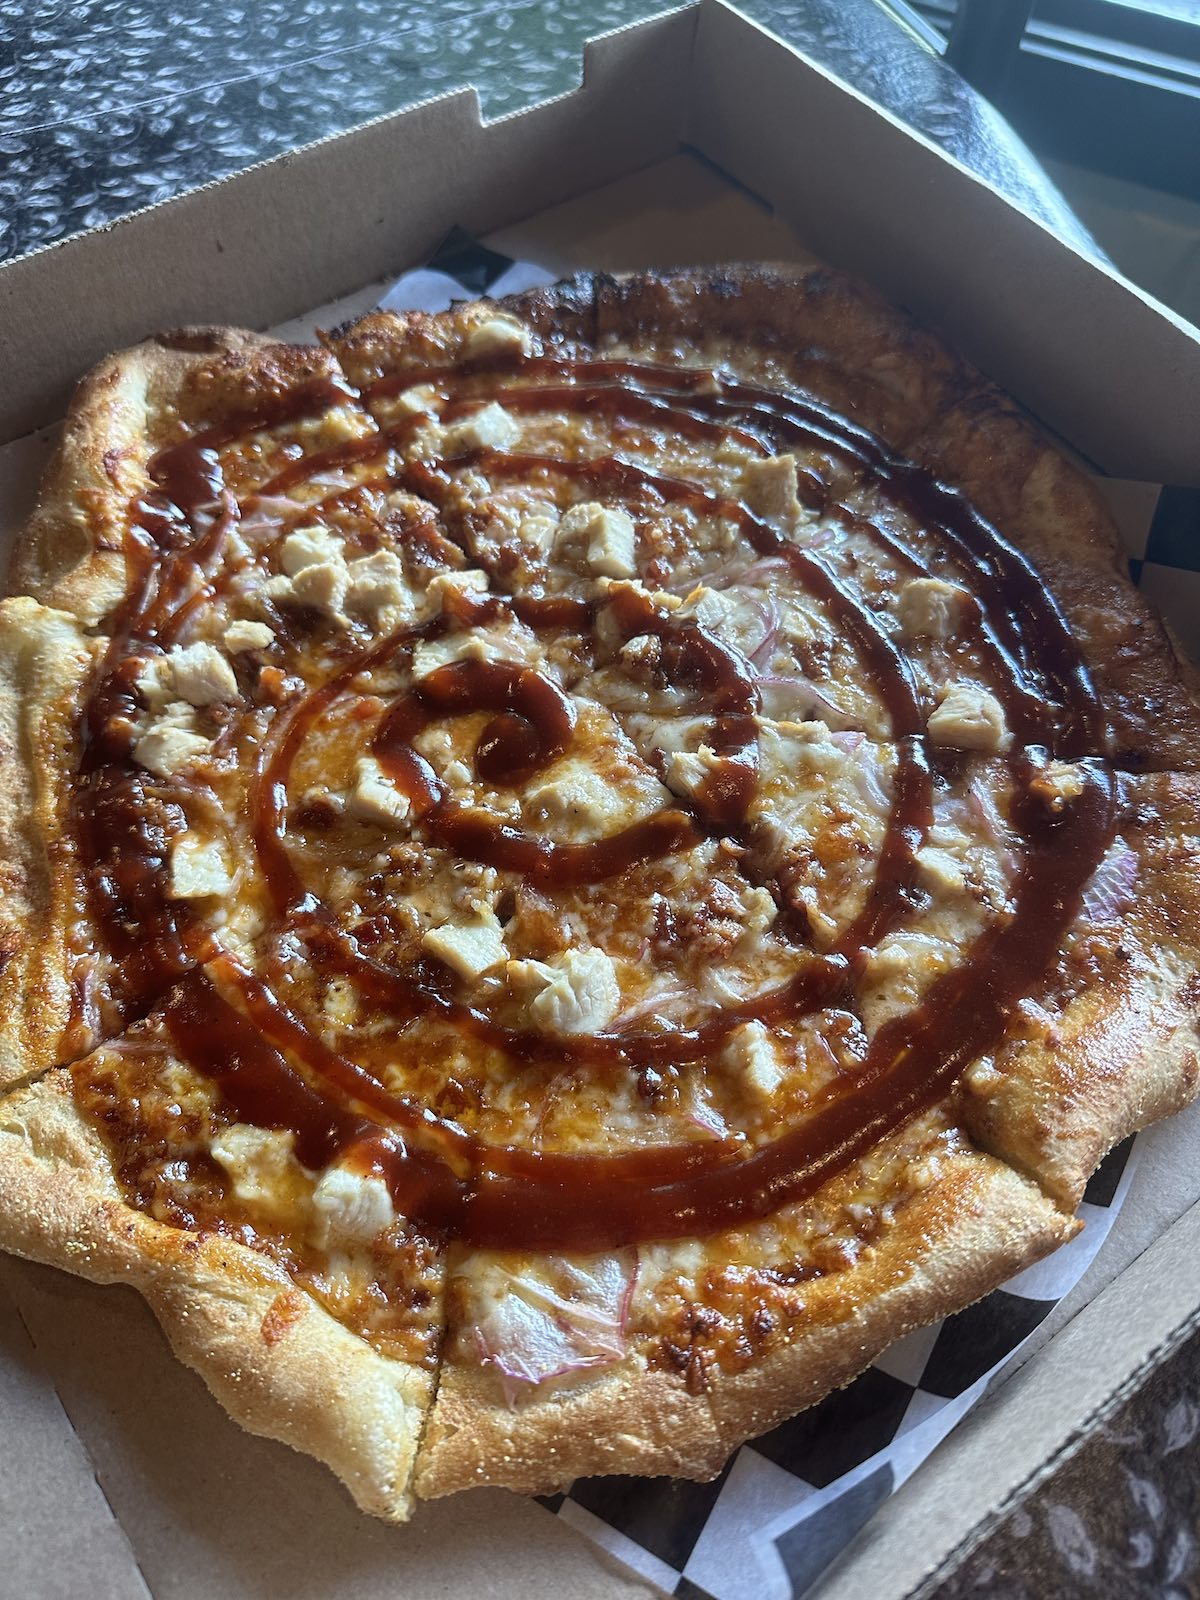 Savory BBQ Chicken Pizza with succulent chicken pieces, drizzled BBQ sauce, crispy bacon, and caramelized onions, served at The Italian Oven in Somerset, PA